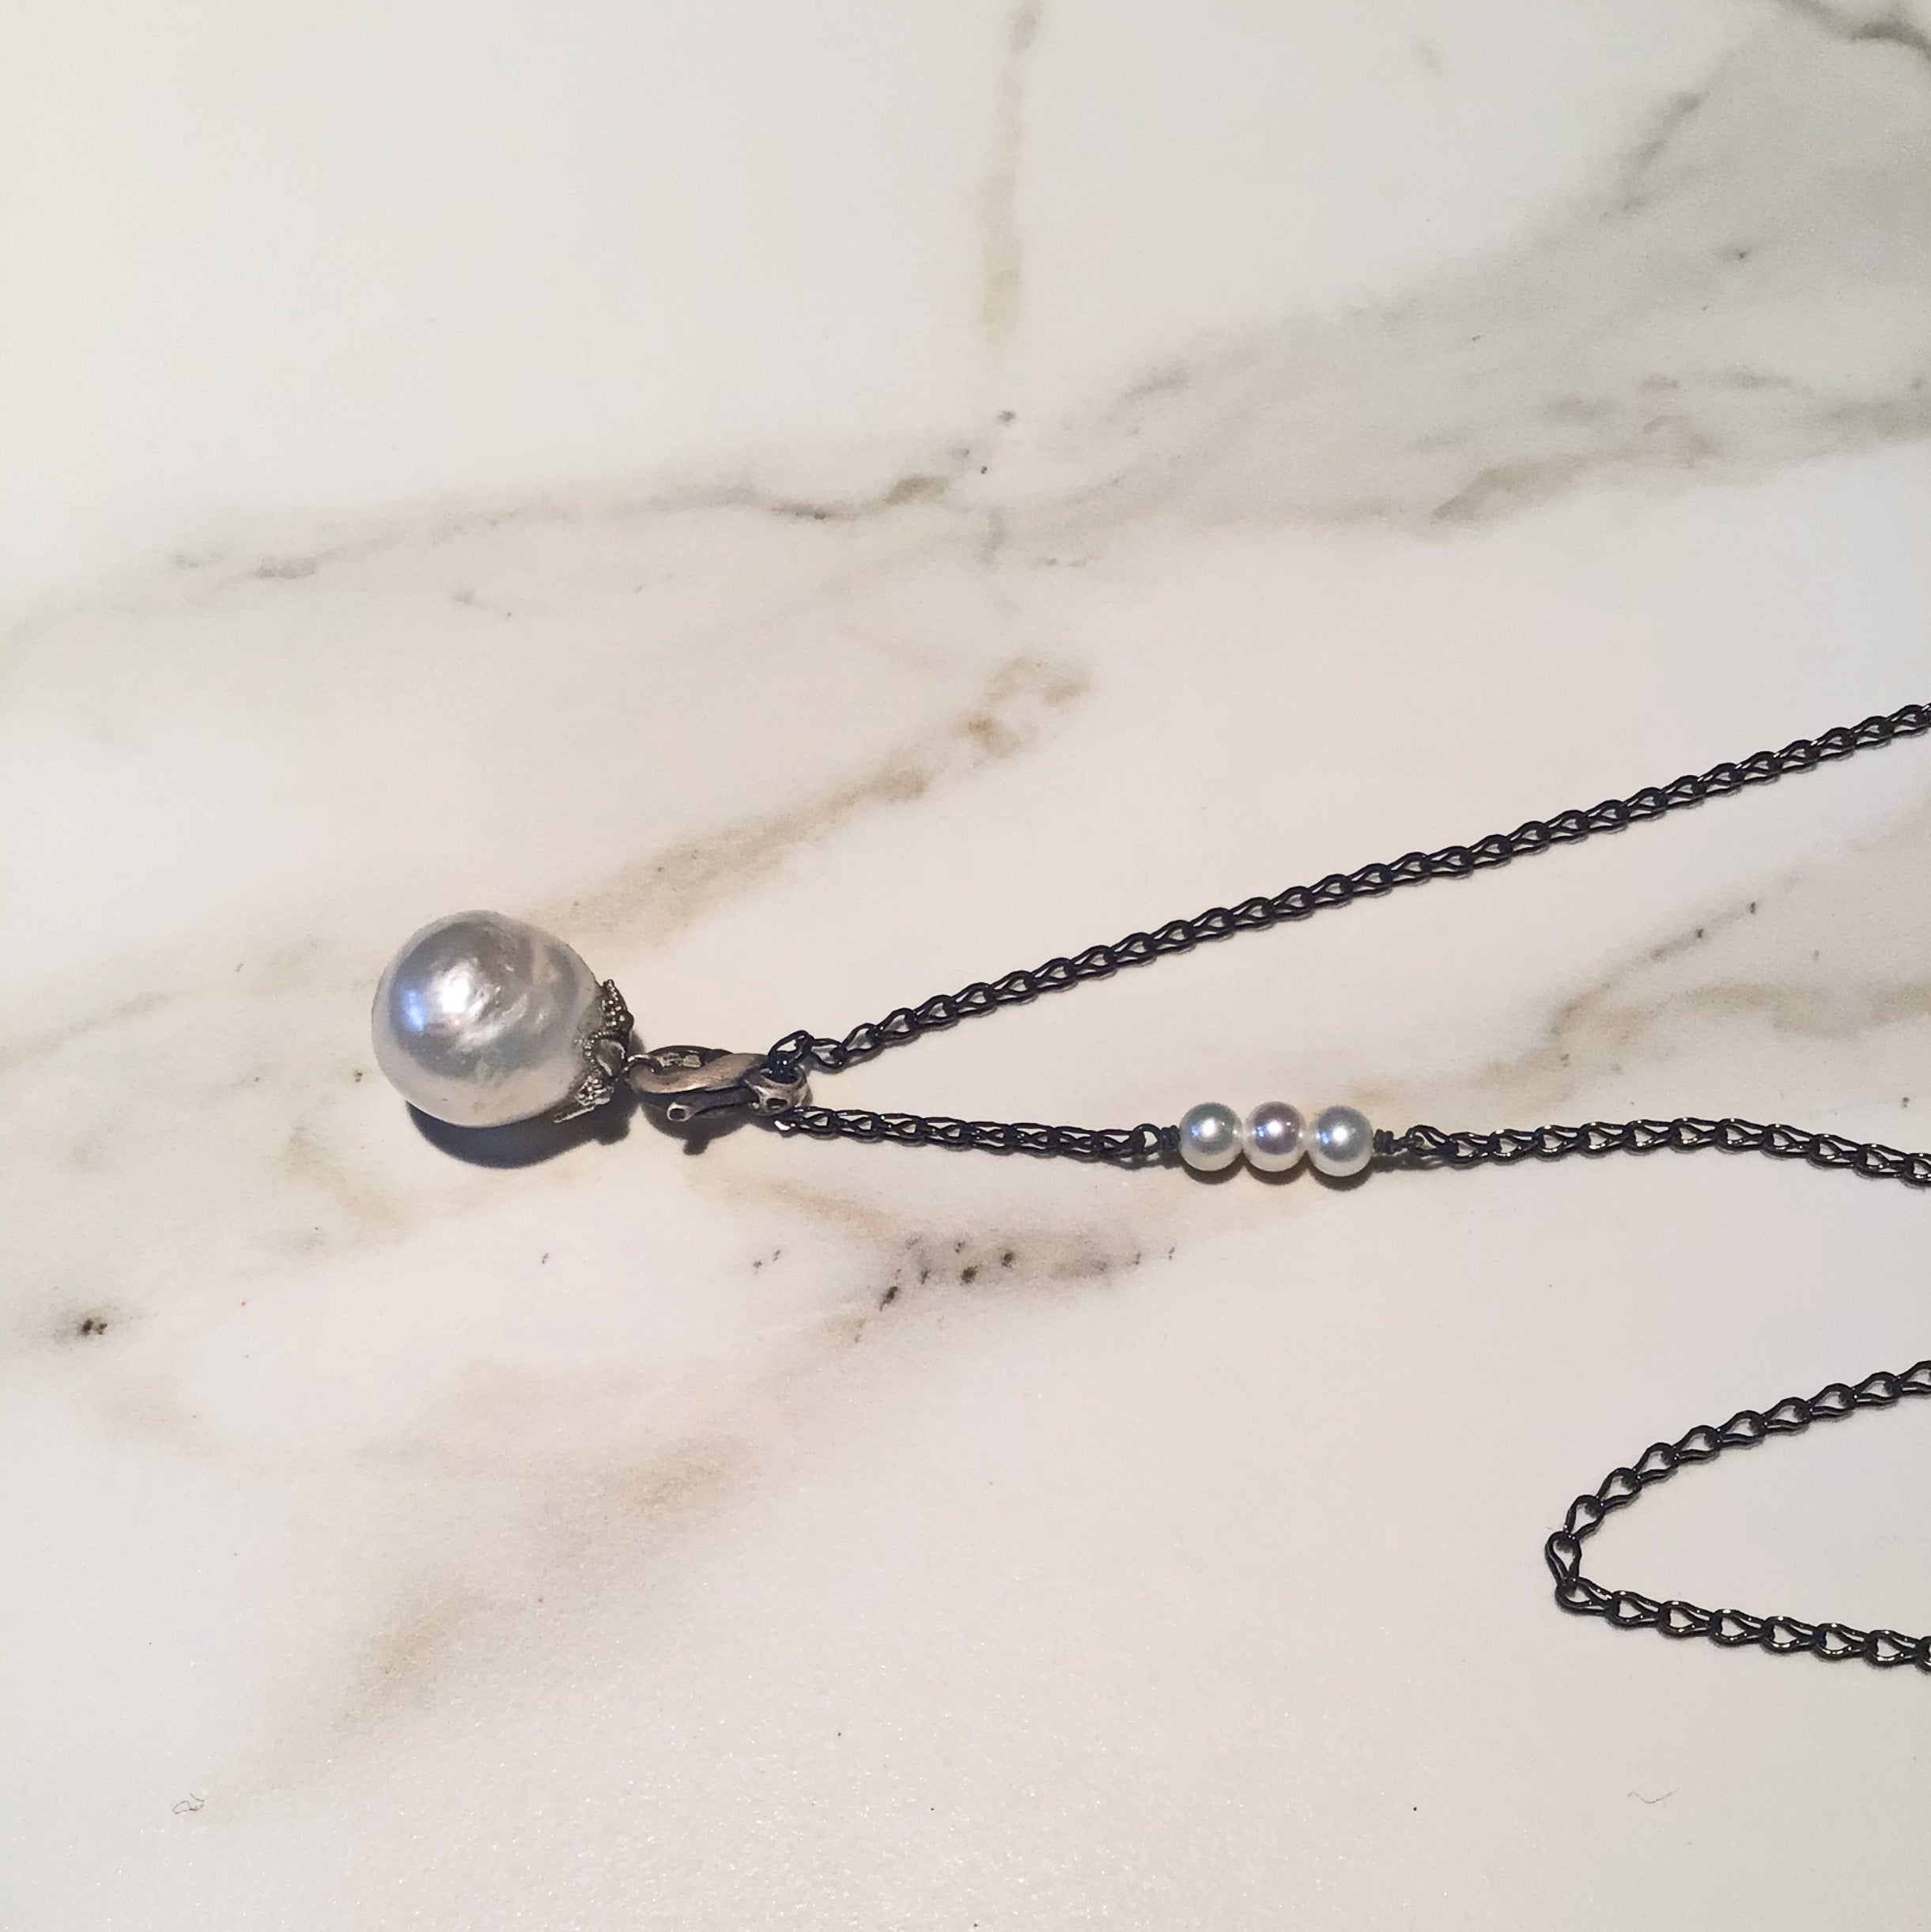 Pendant: Large White Edison Pearl with White Gold